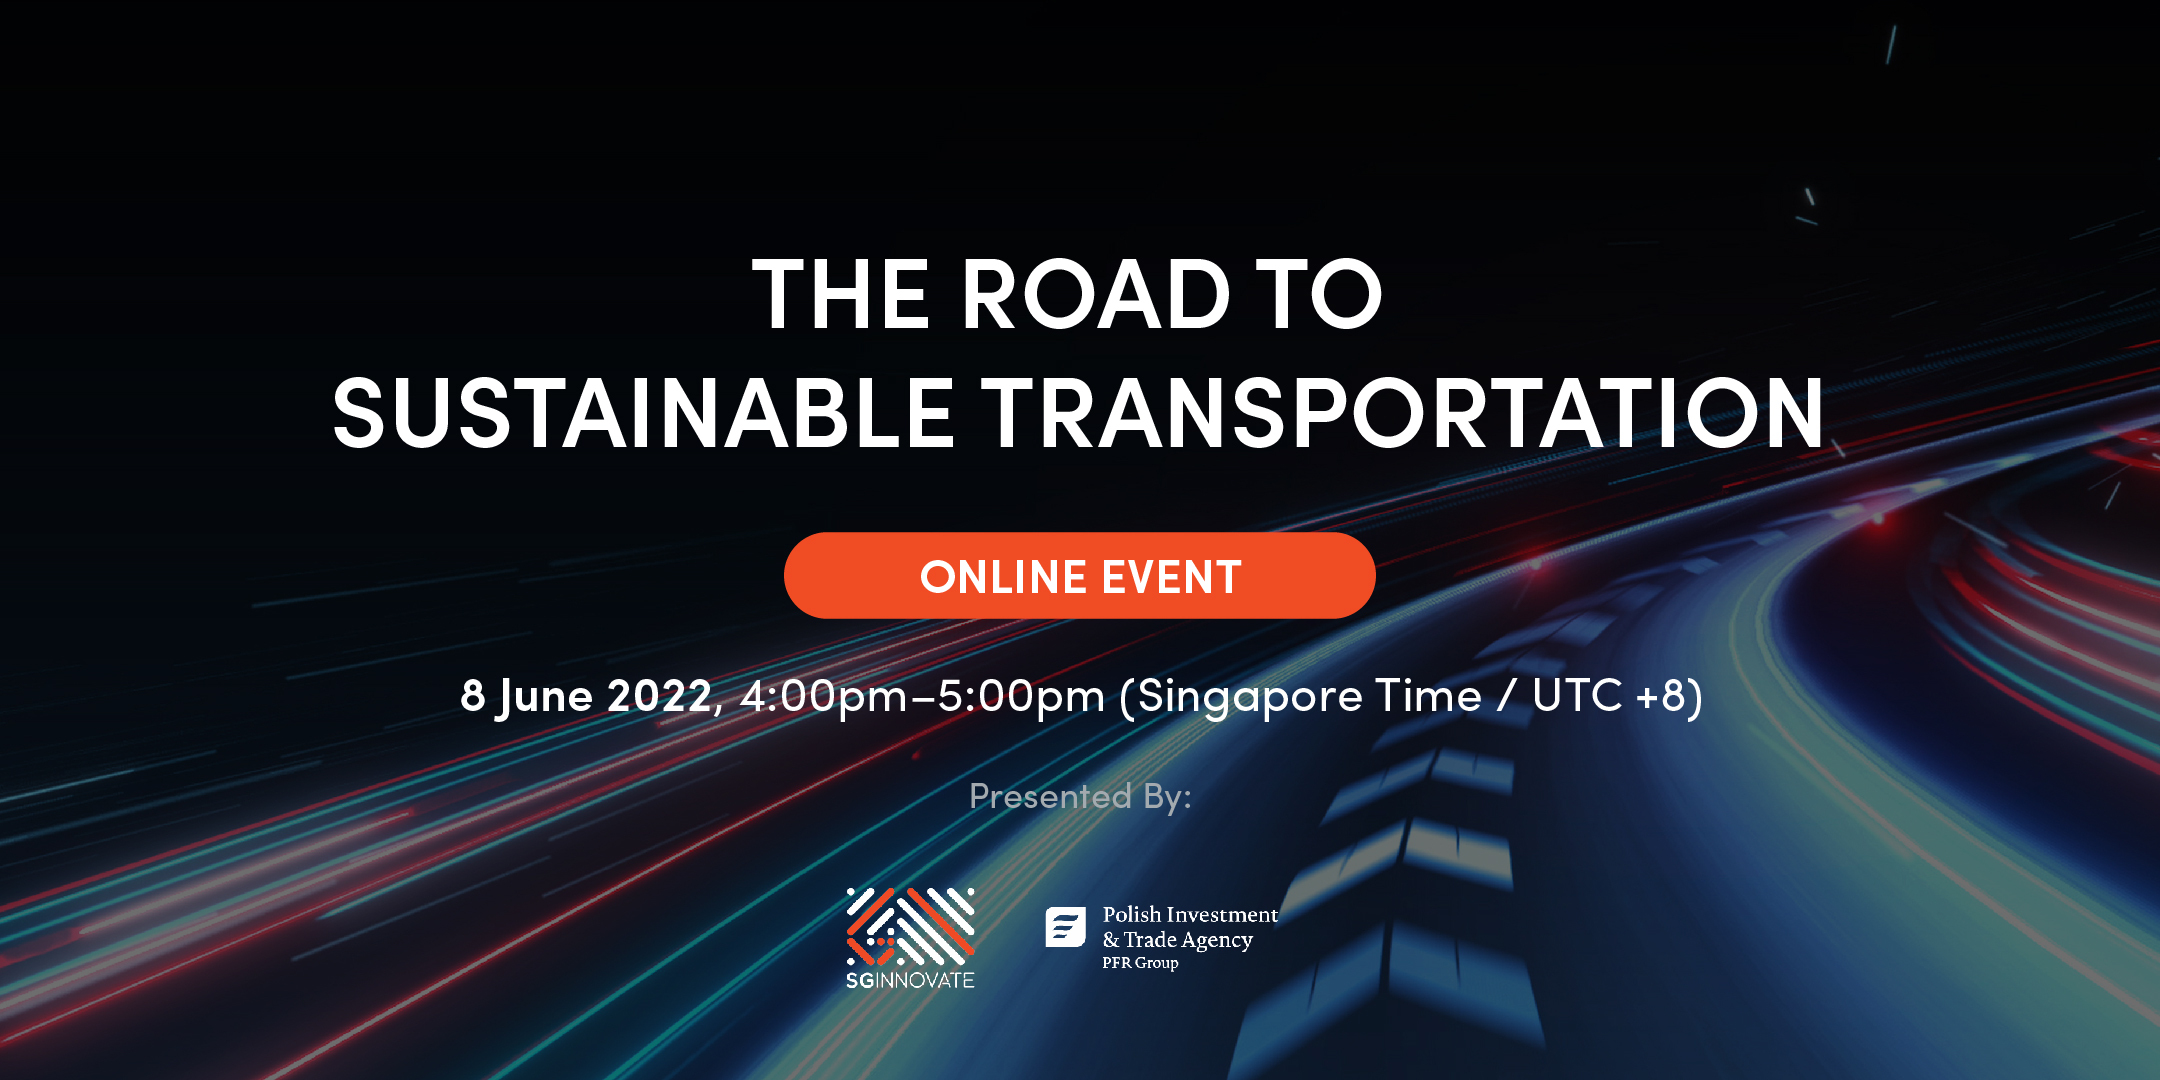 The Road to Sustainable Transportation